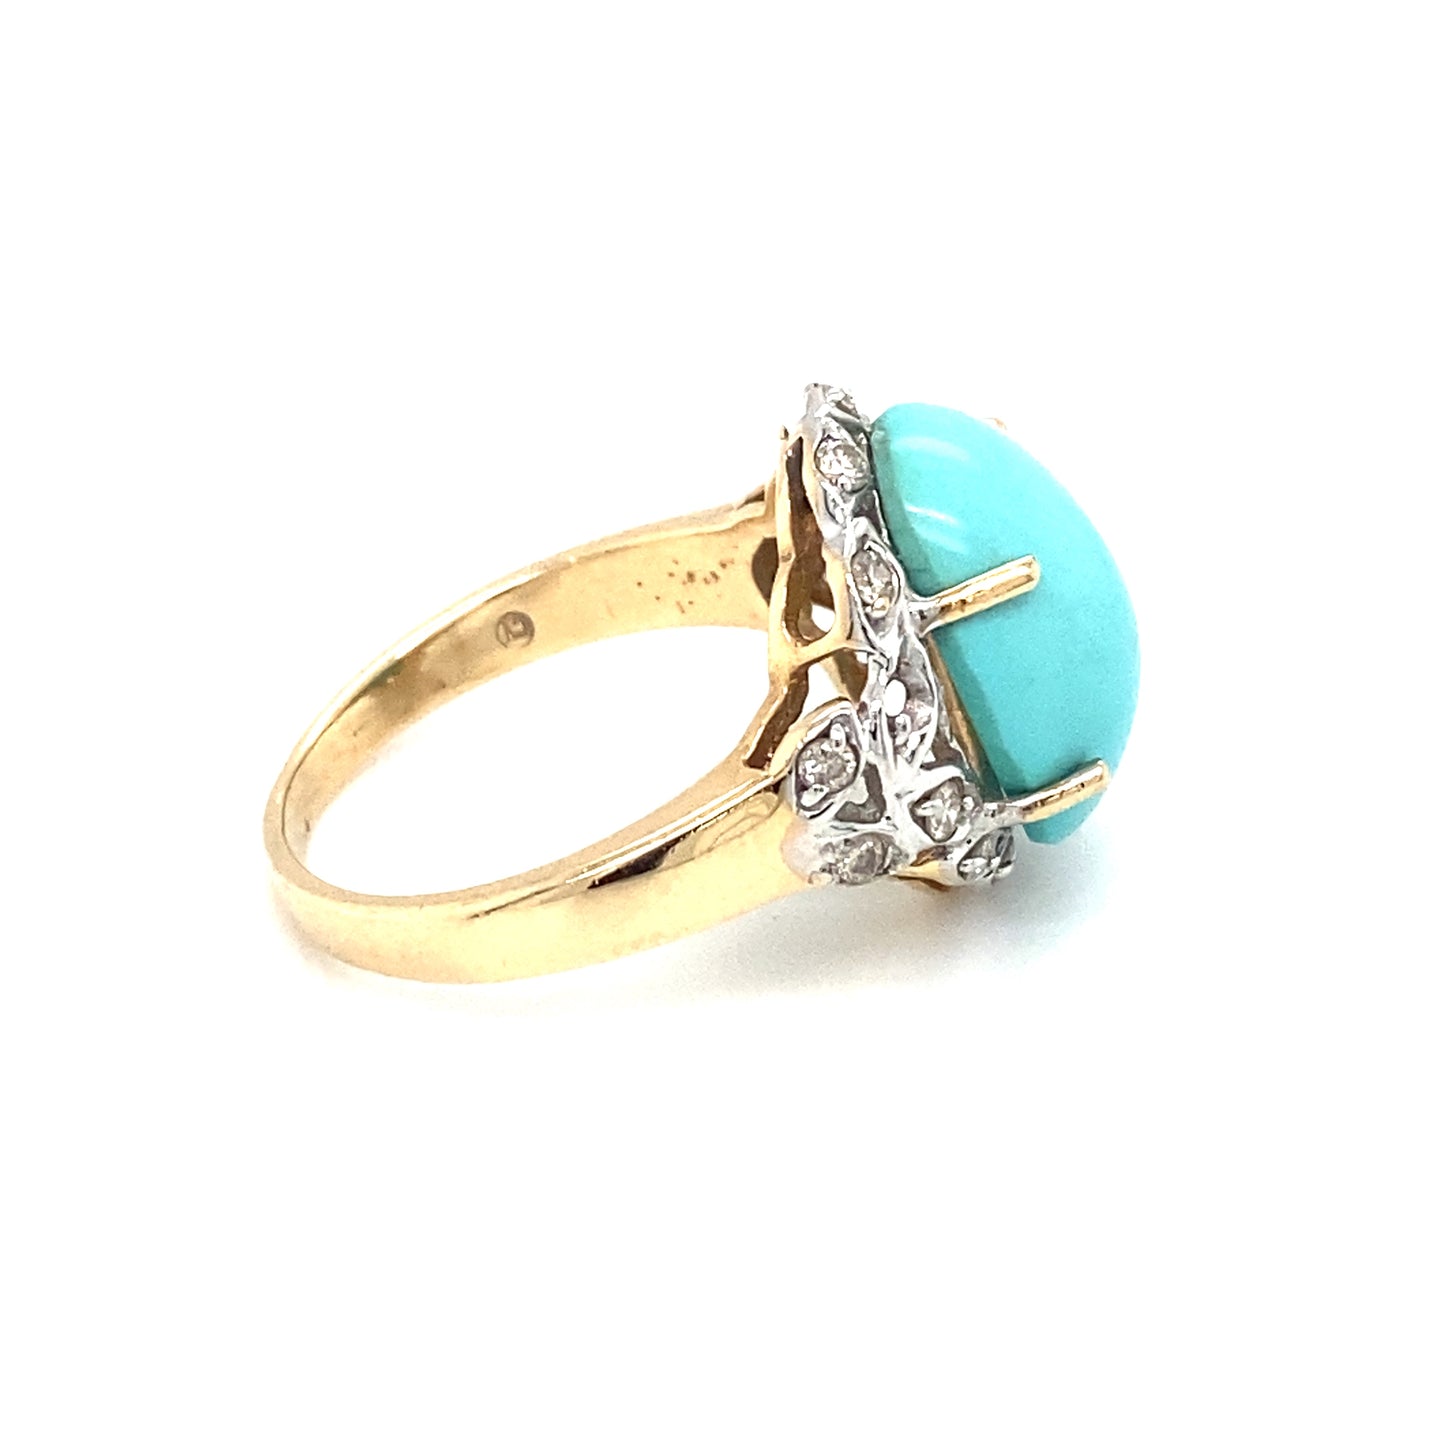 Circa 2000s Persian Turquoise and Diamond Ring in 14K White Gold